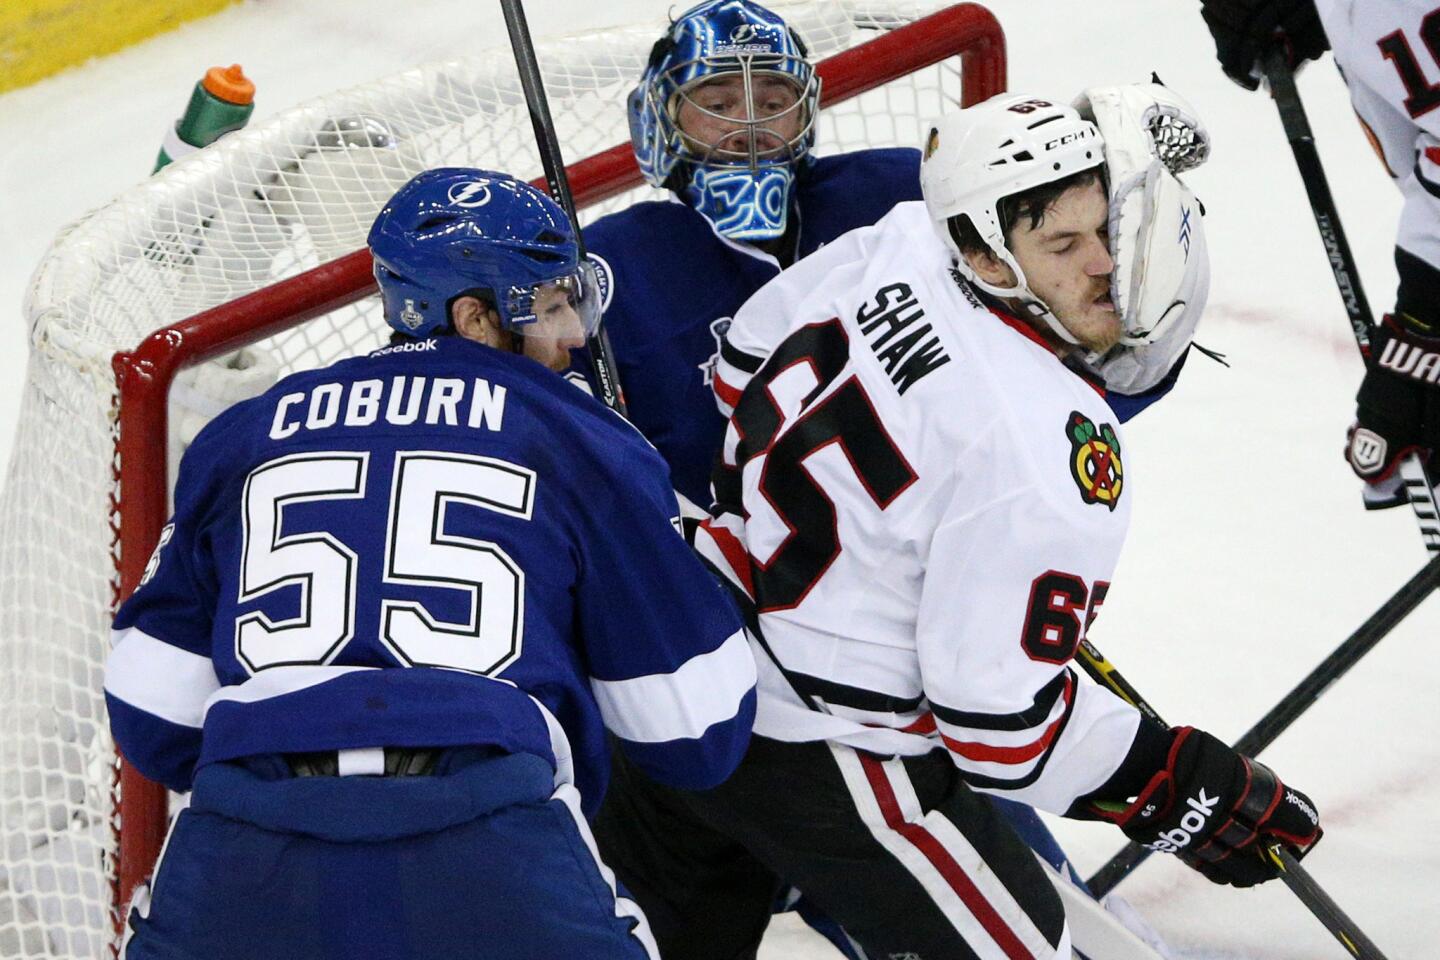 Lightning goaltender Ben Bishop smacks Andrew Shaw in the face with his glove during the second period.